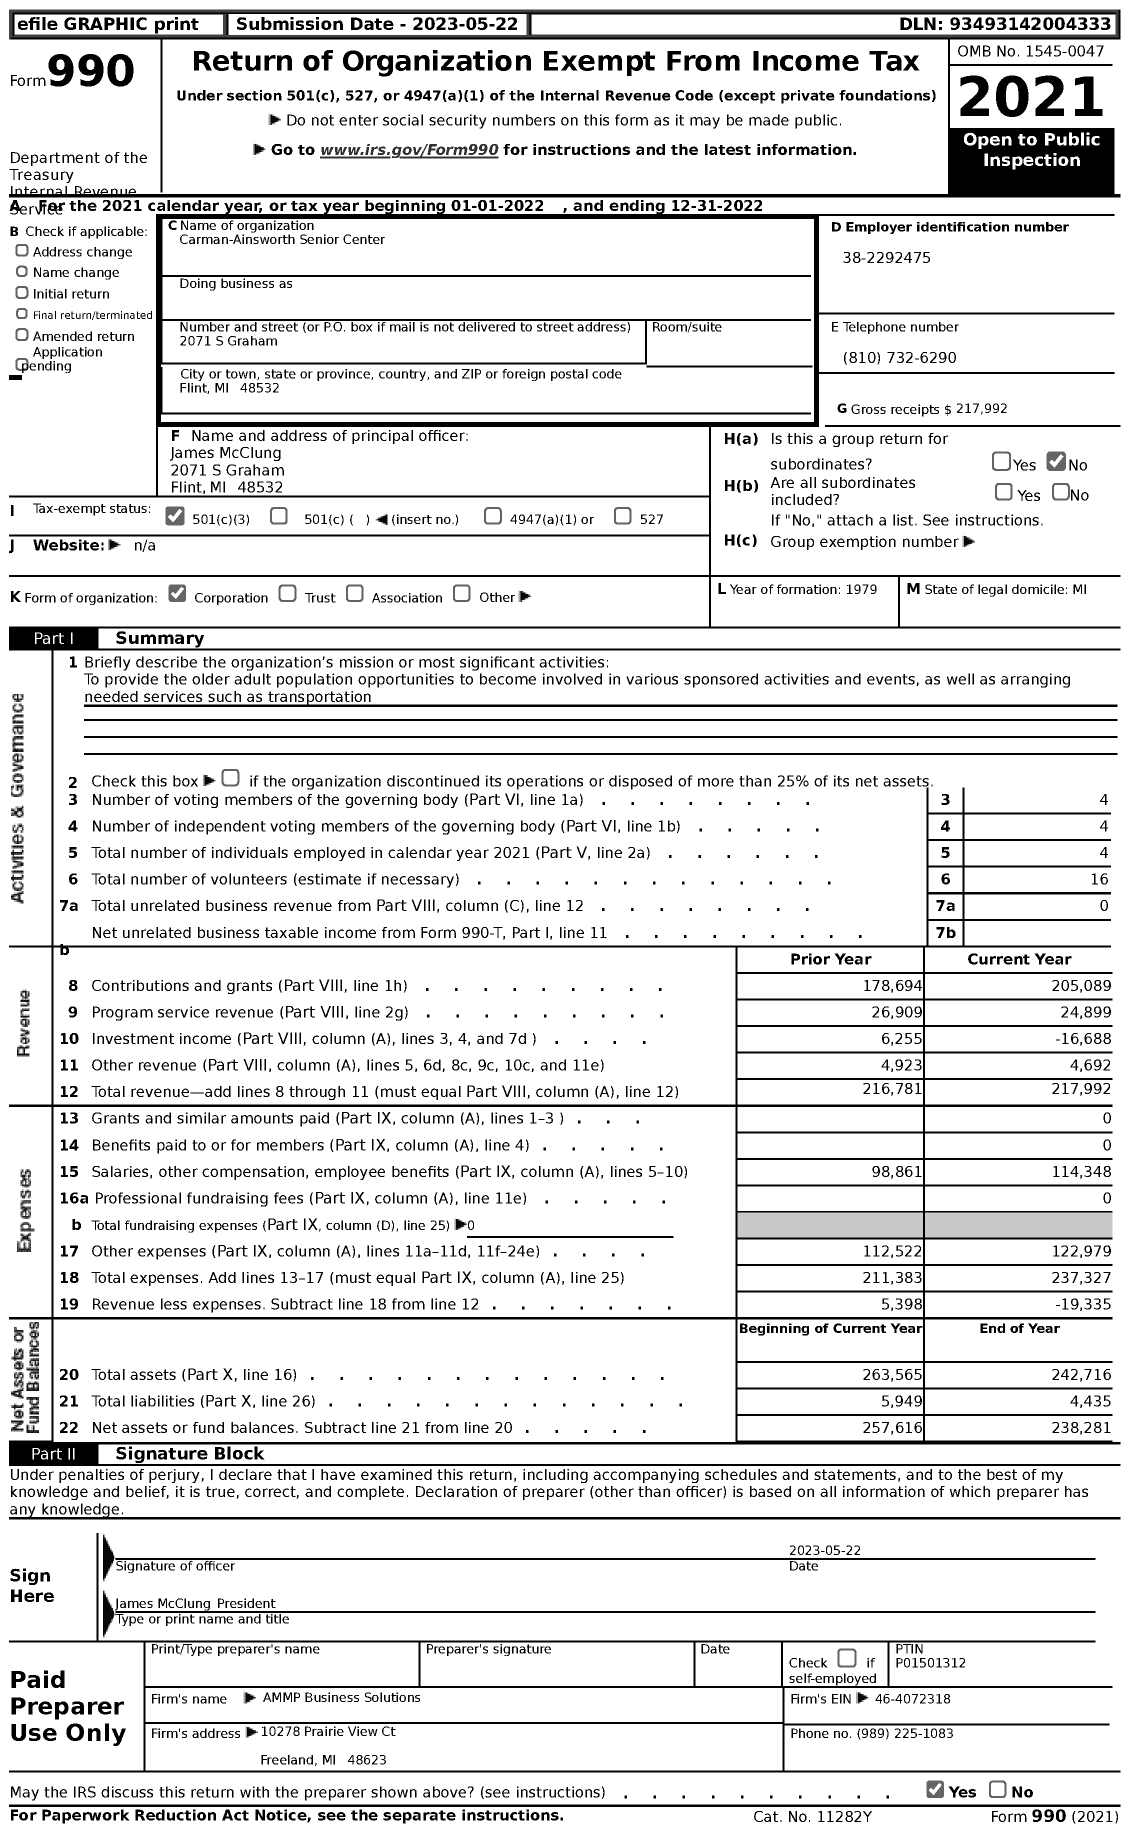 Image of first page of 2022 Form 990 for Carman-Ainsworth Senior Center